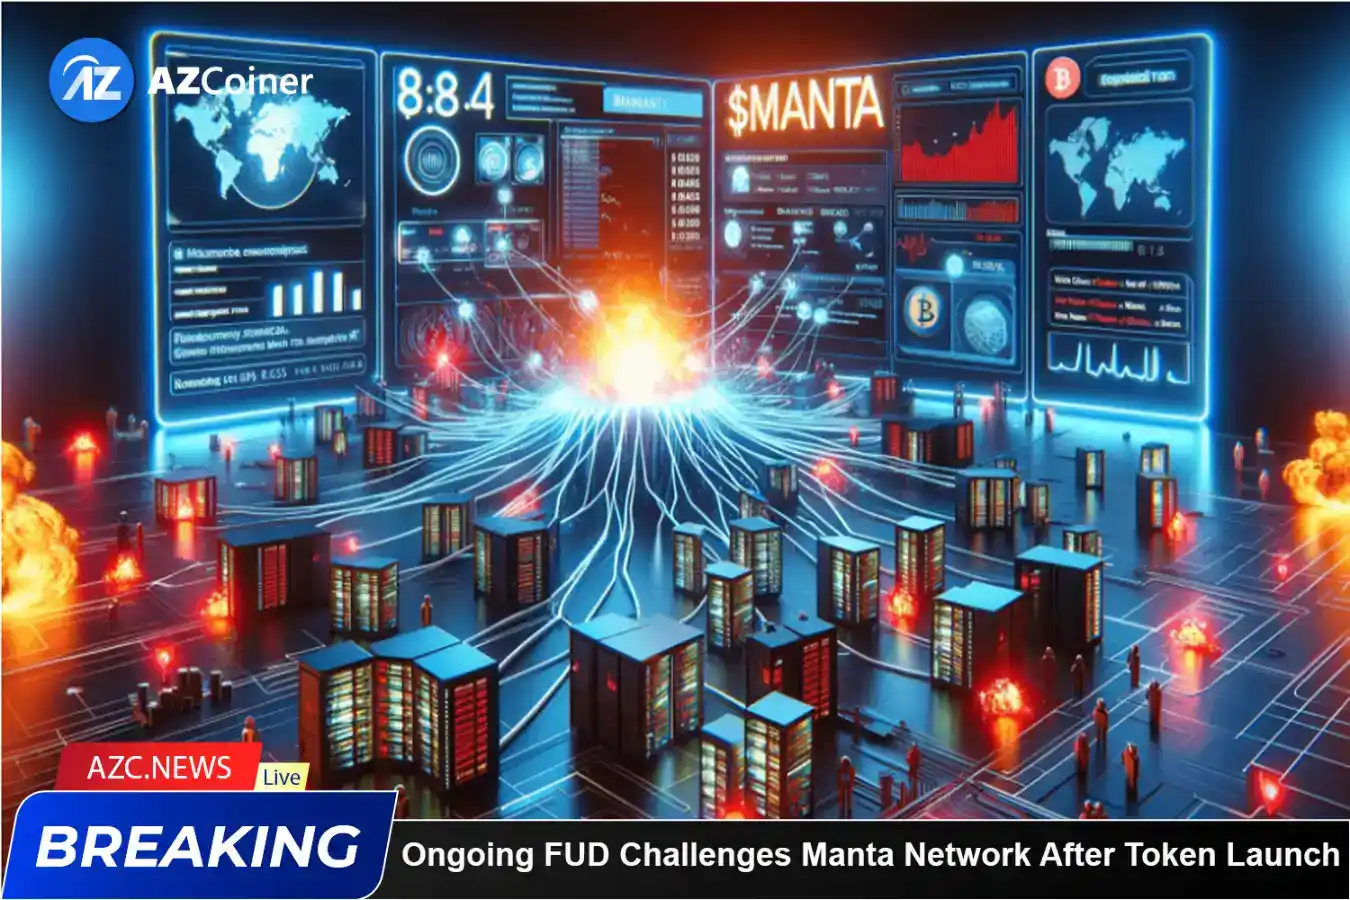 Ongoing Fud Challenges Manta Network After Token Launch_65b97722bfb85.webp